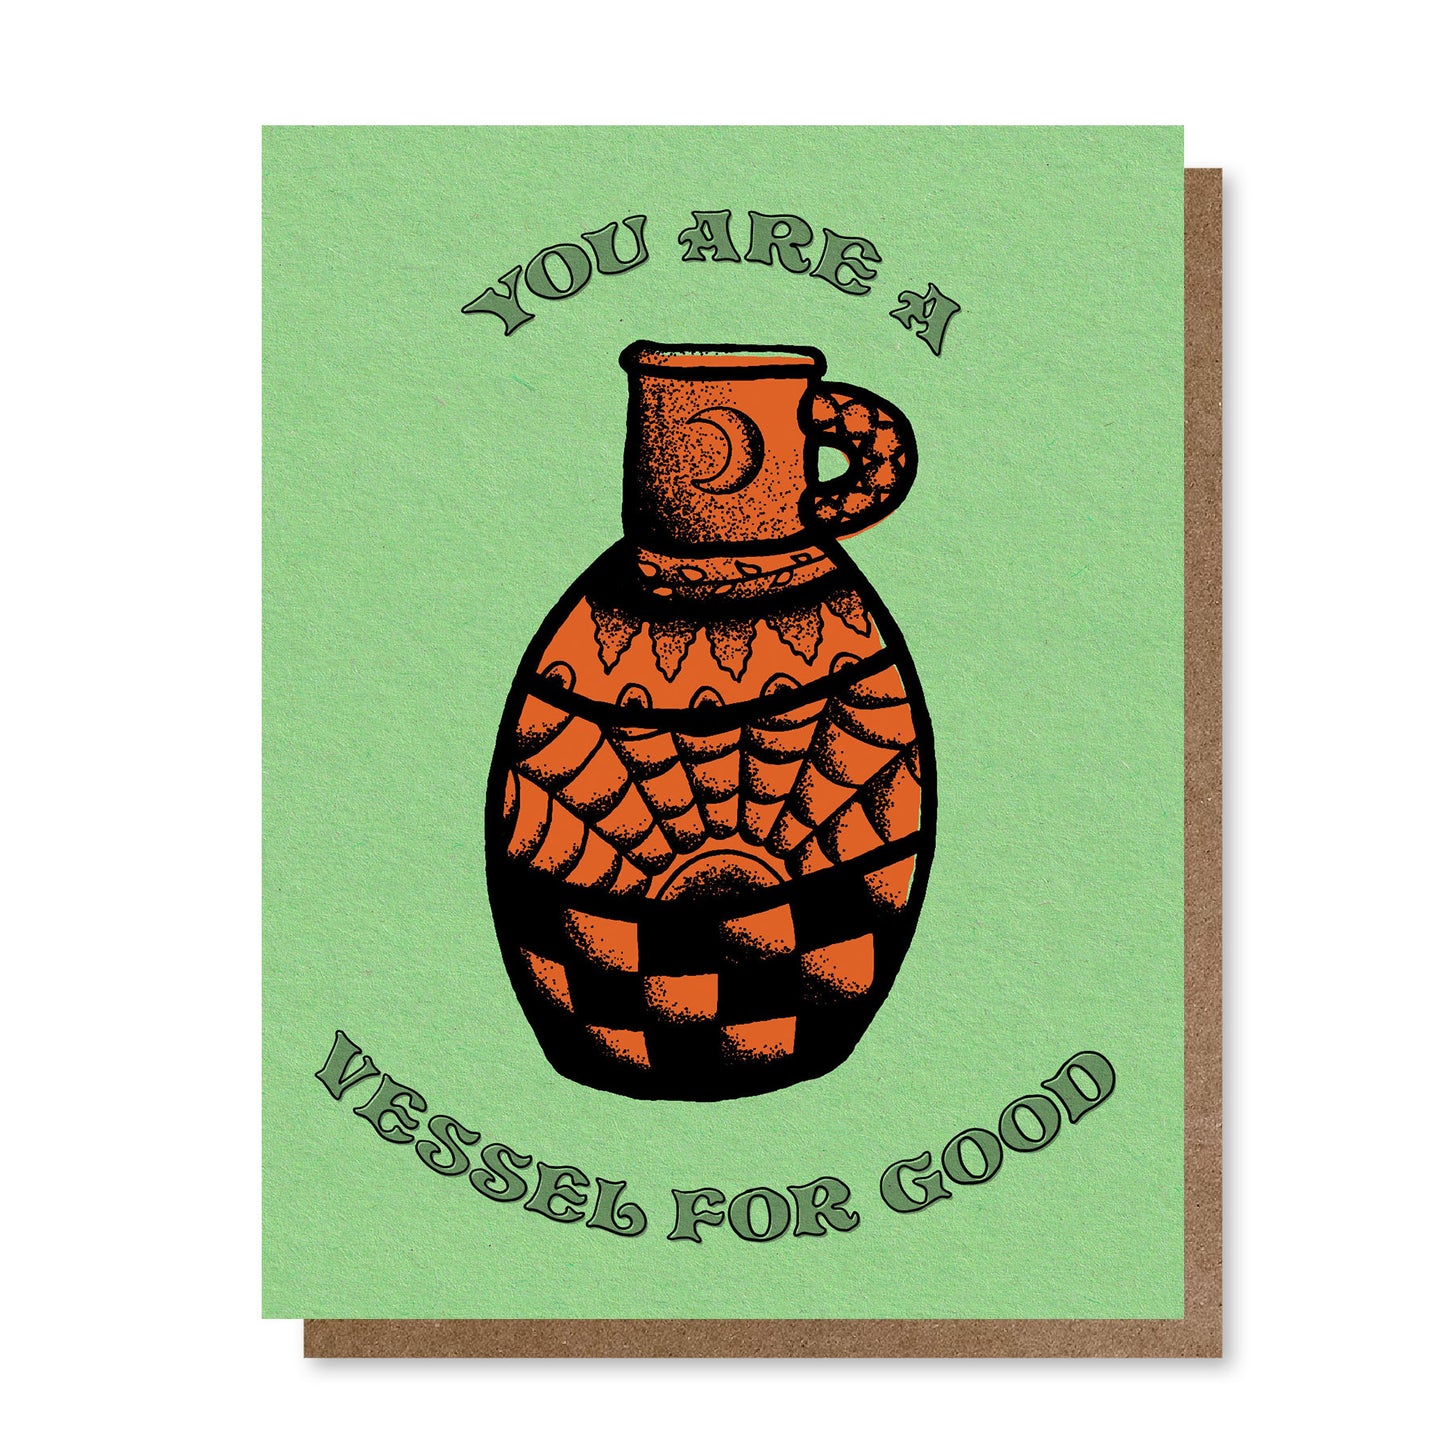 Vessel For Good | Greeting Card